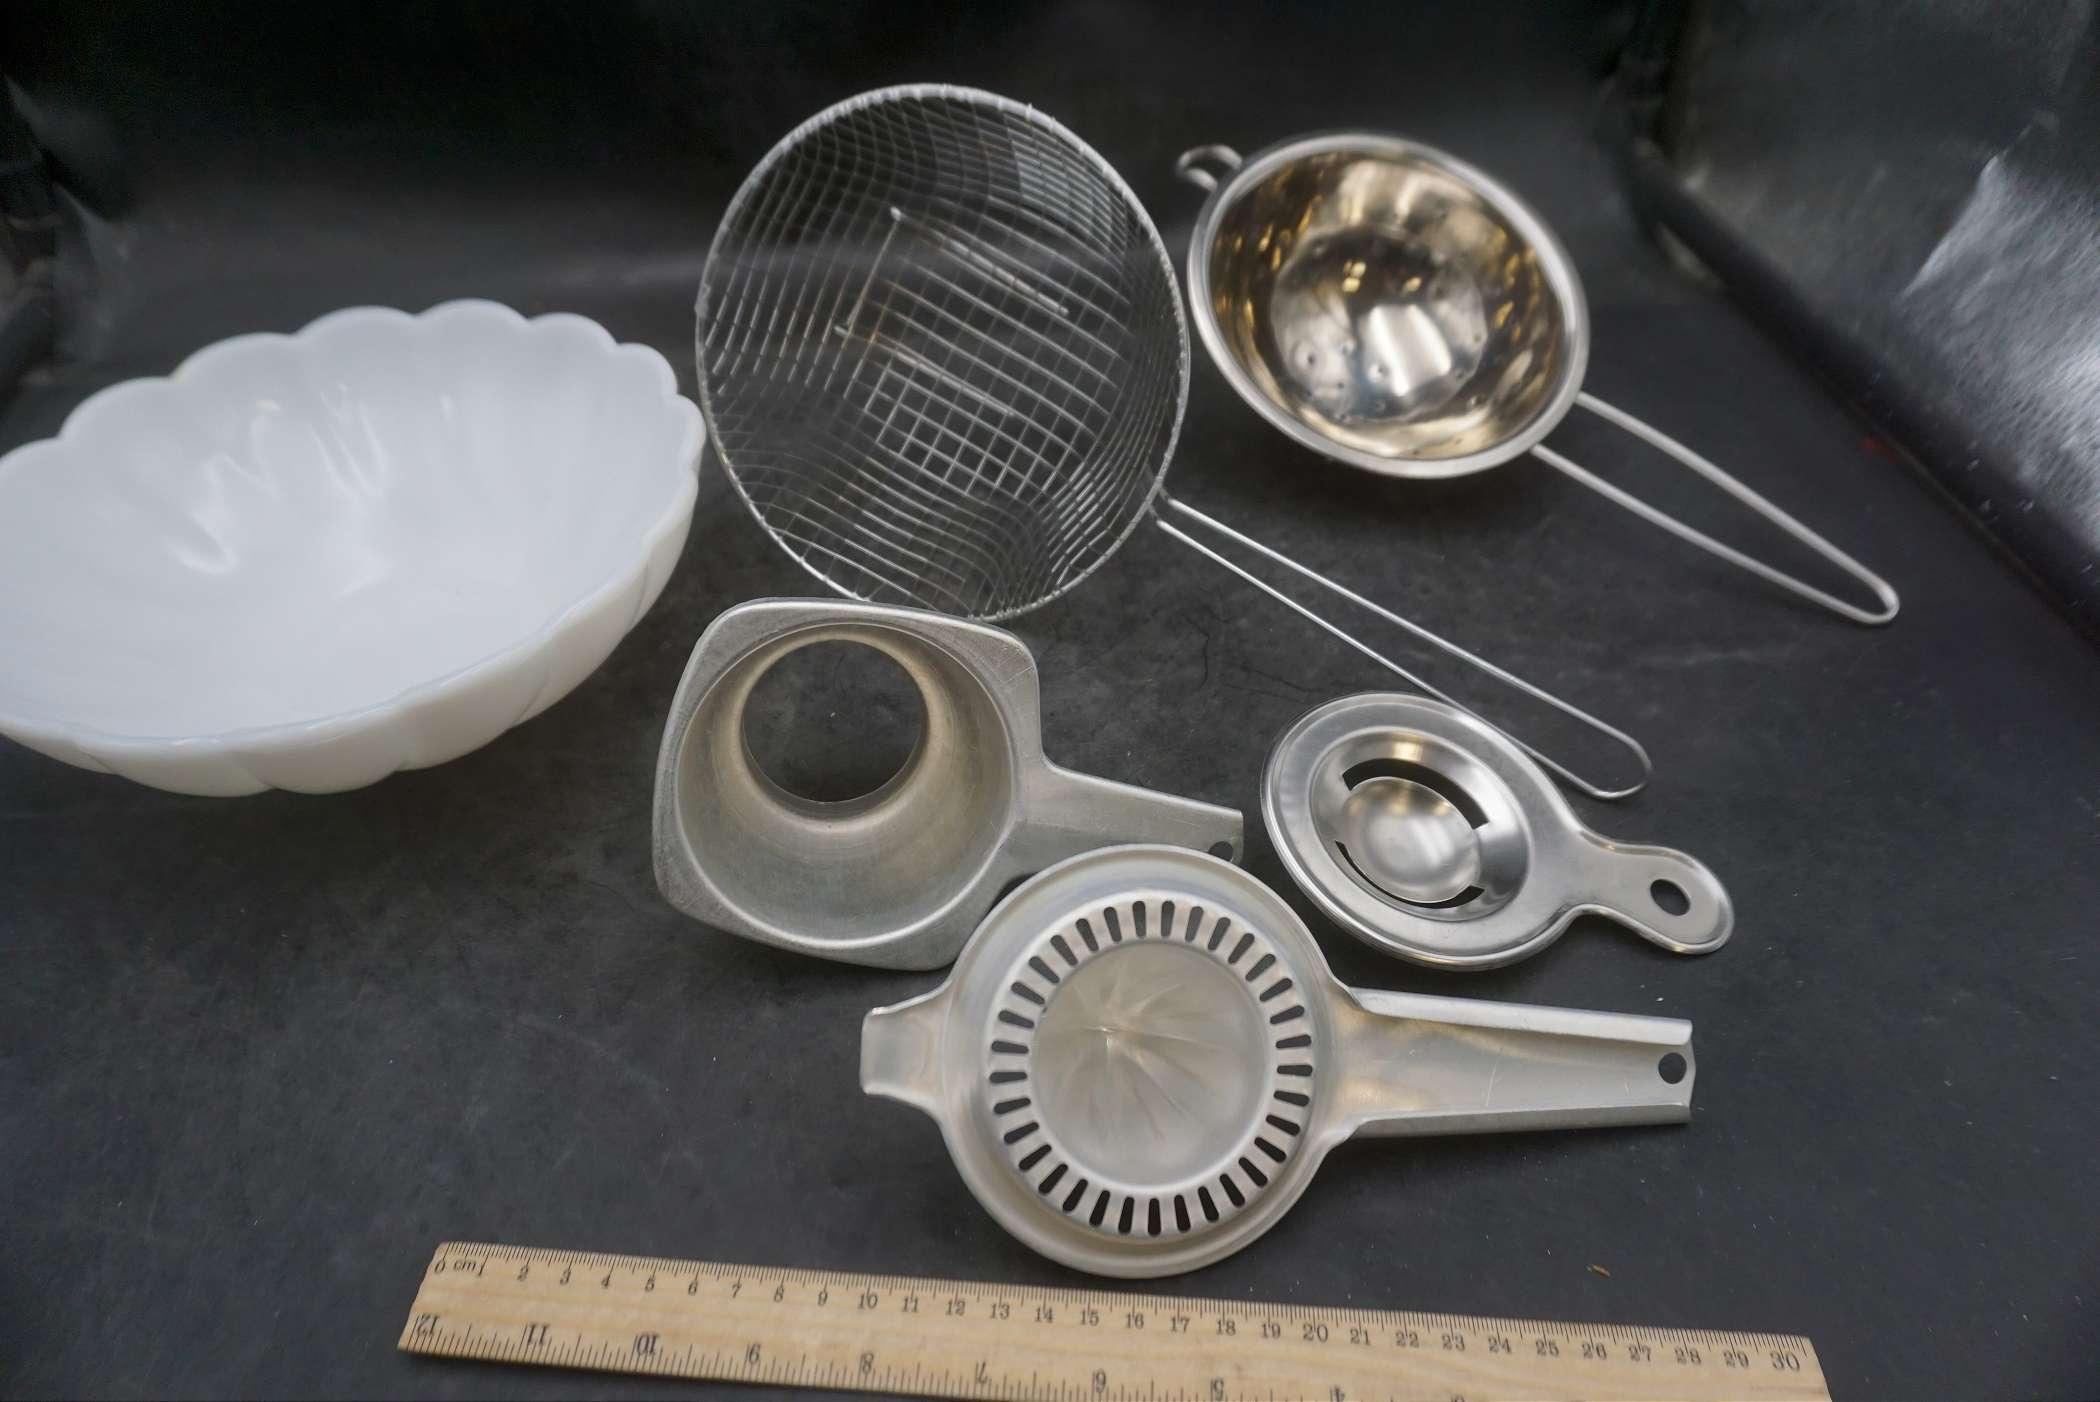 Strainers, Juicer & Bowl